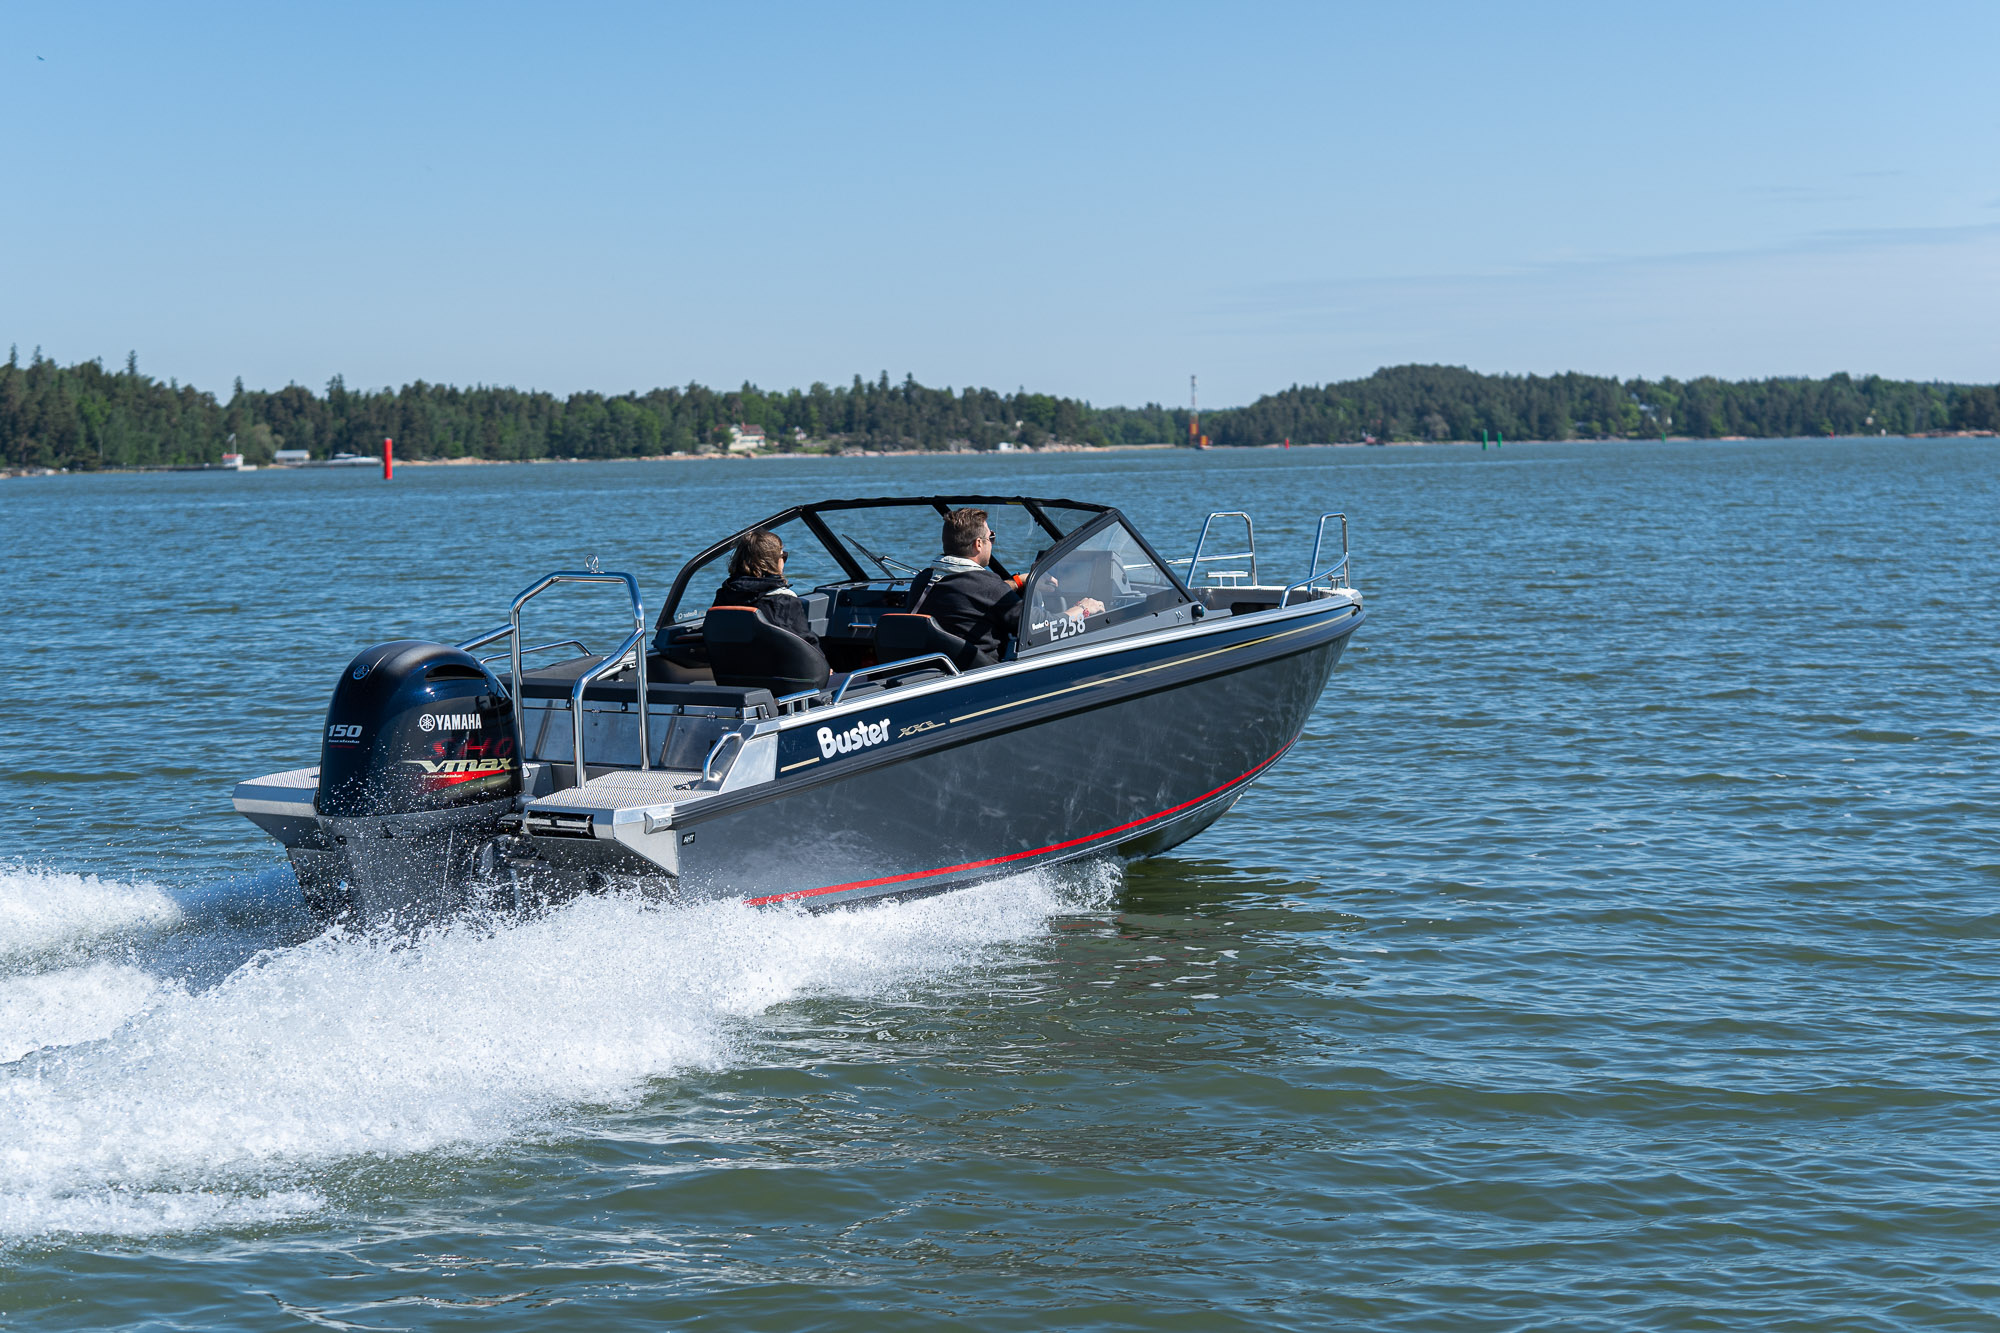 Buster XXL VMAX edition with Yamaha VMAX SHO outboard engine